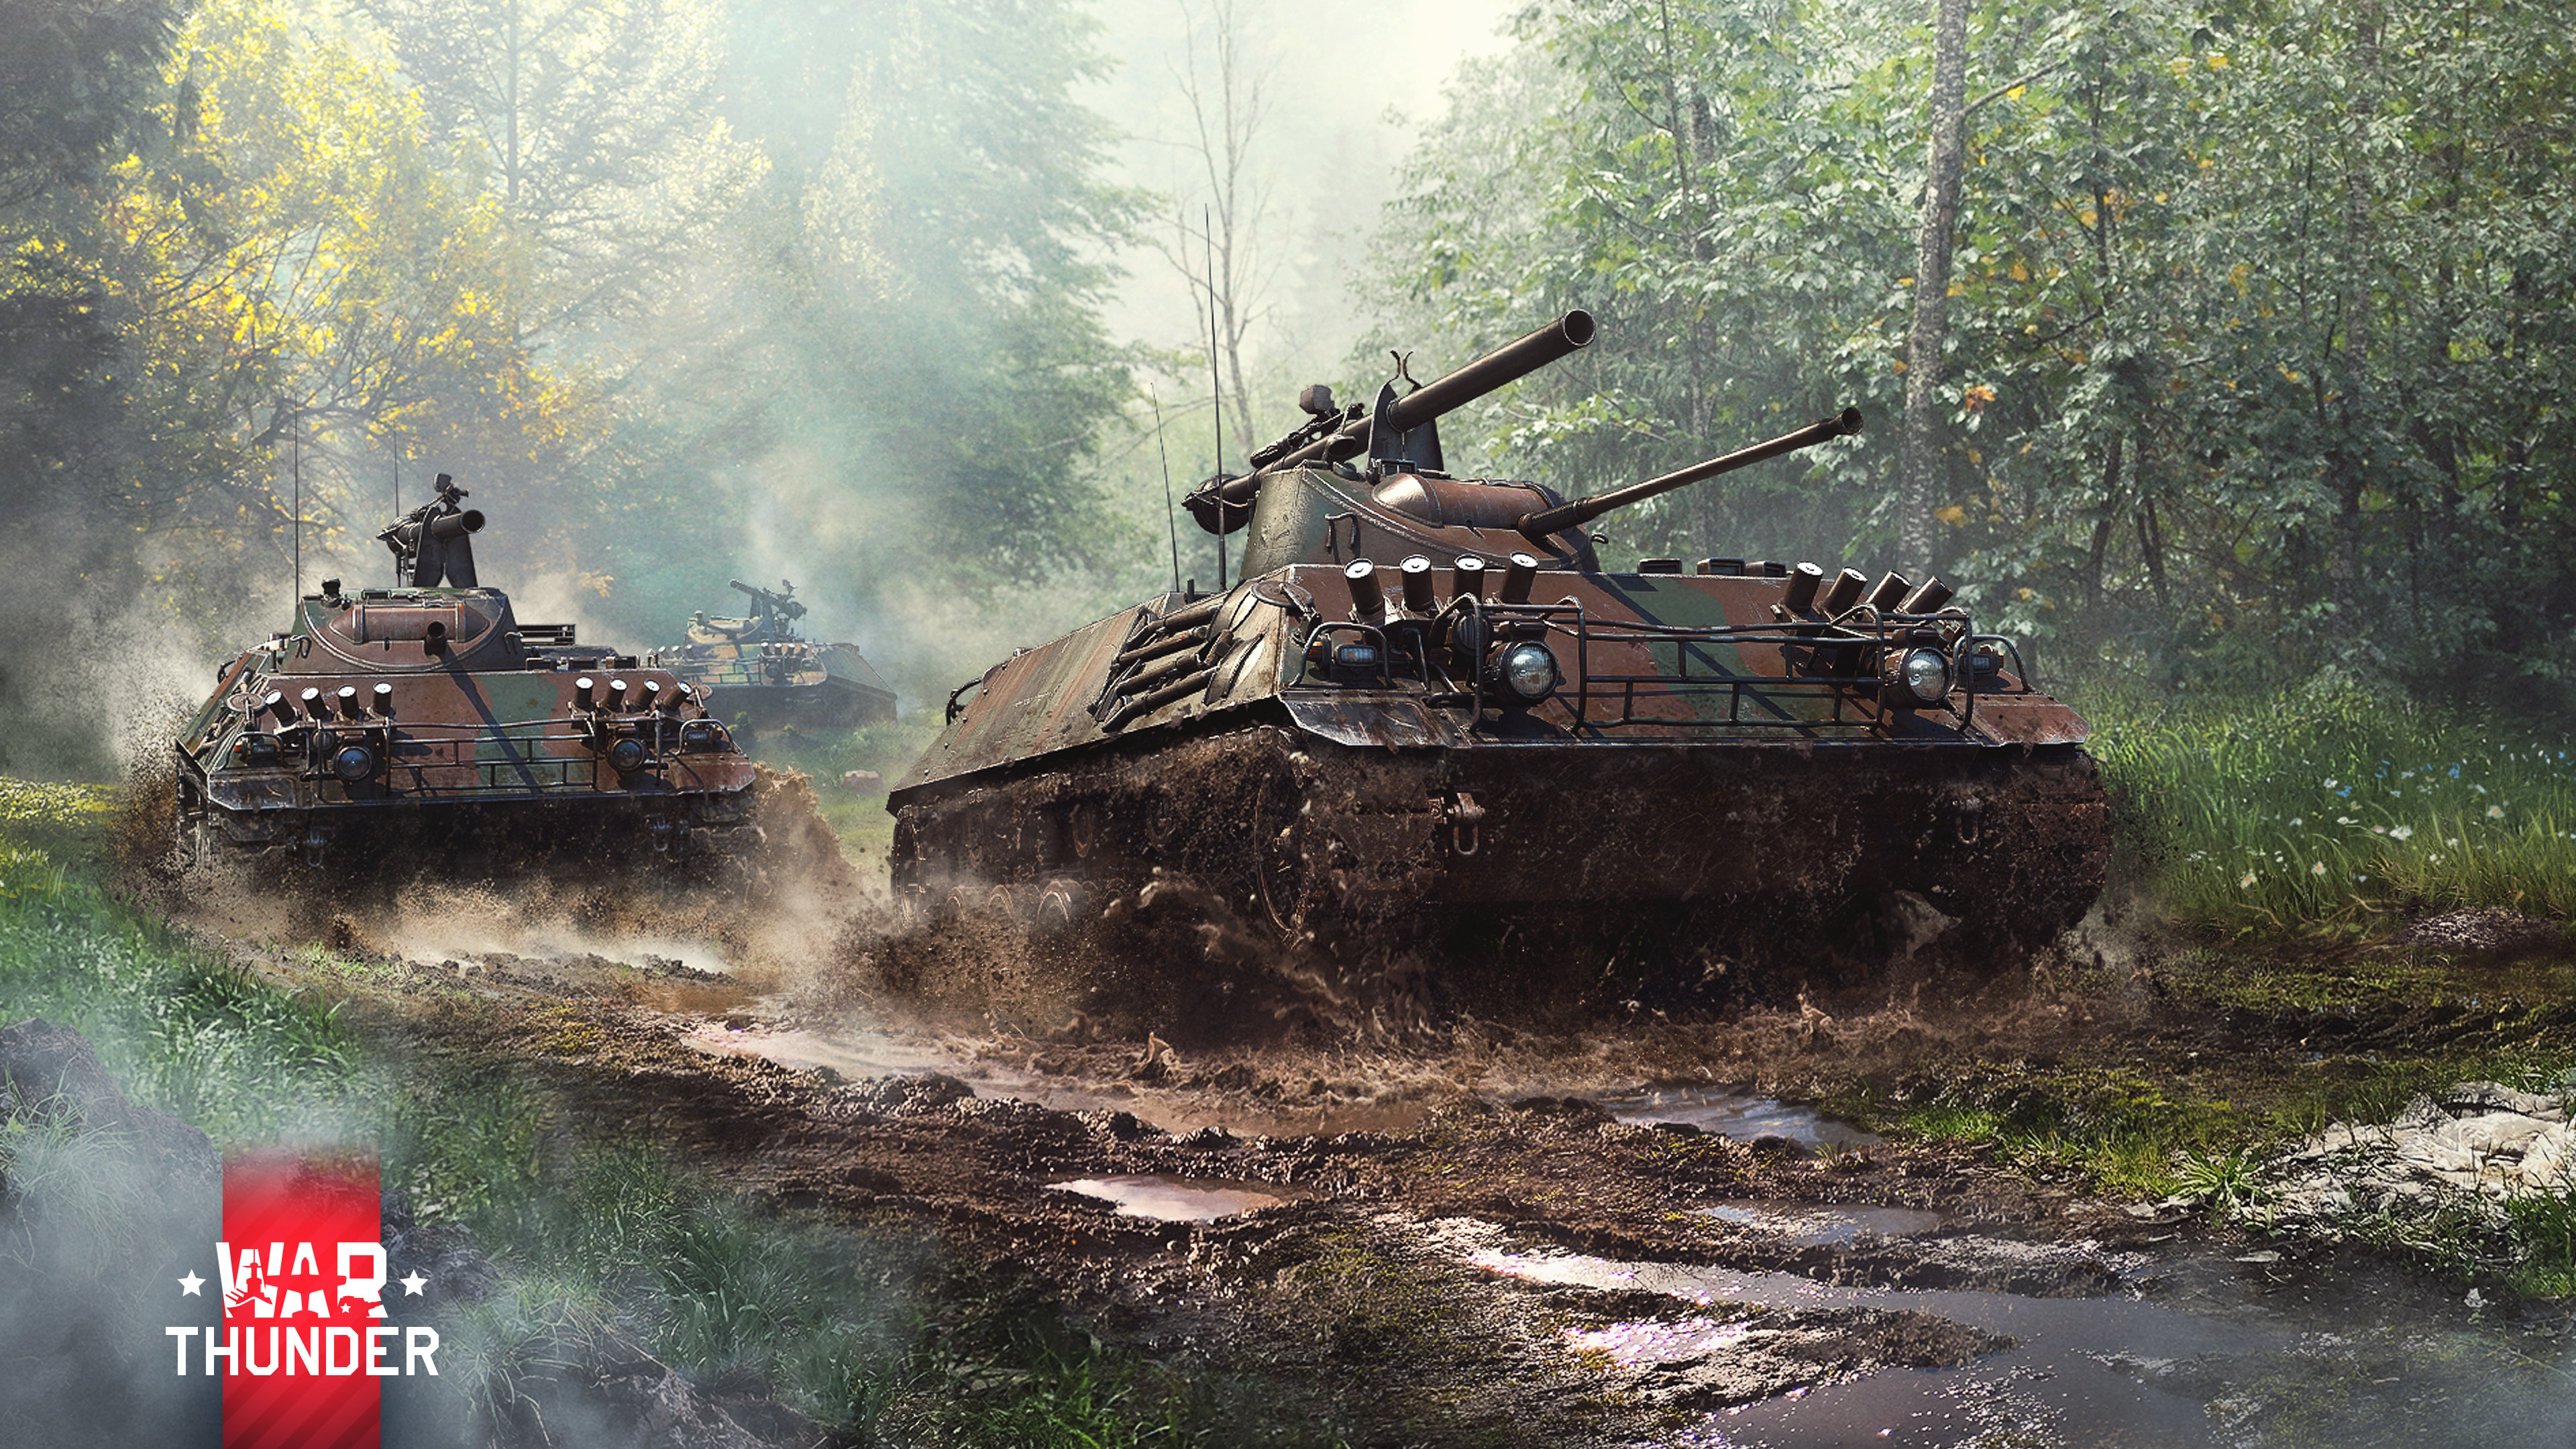 British Tank Destroyers World of Tanks Wallpapers  HD Wallpapers  ID  13947